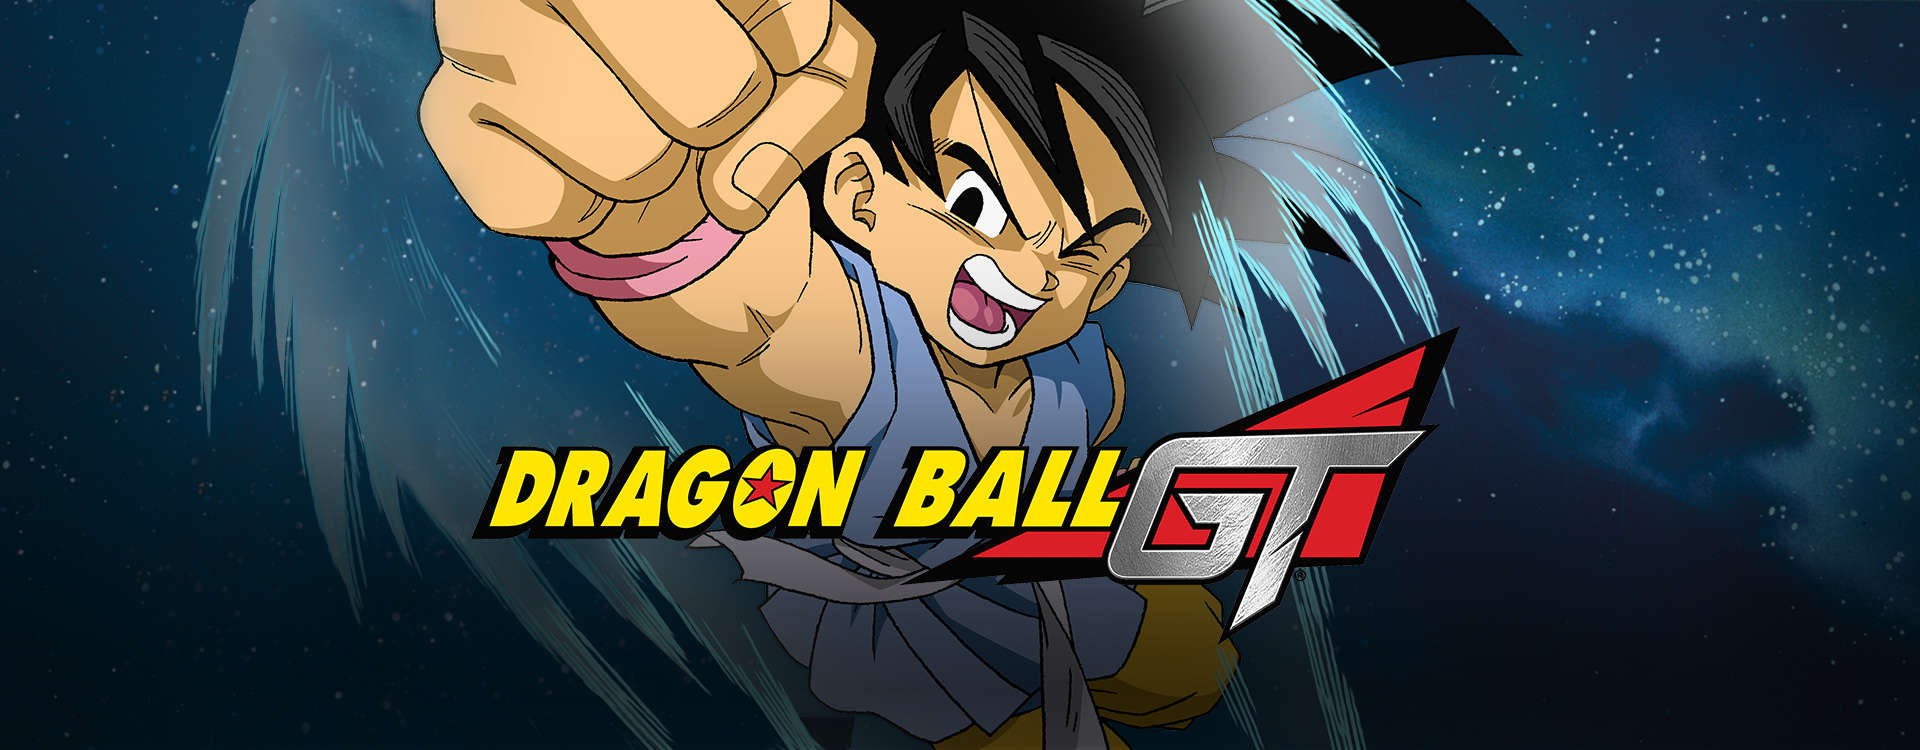 watch dragonball gt episodes in english